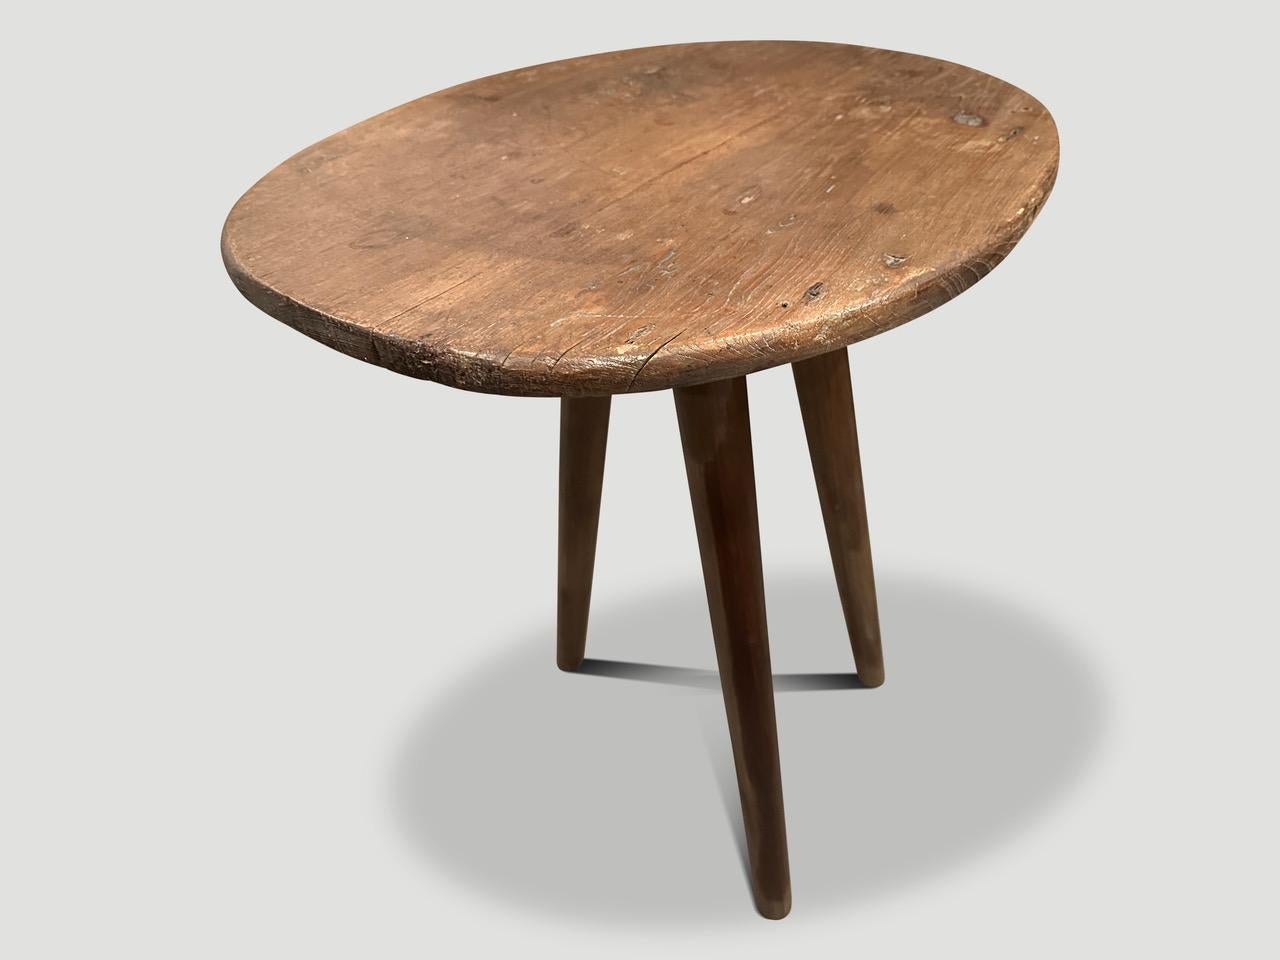 Andrianna Shamaris Minimalist Teak Wood Tripod Side Table In Excellent Condition For Sale In New York, NY